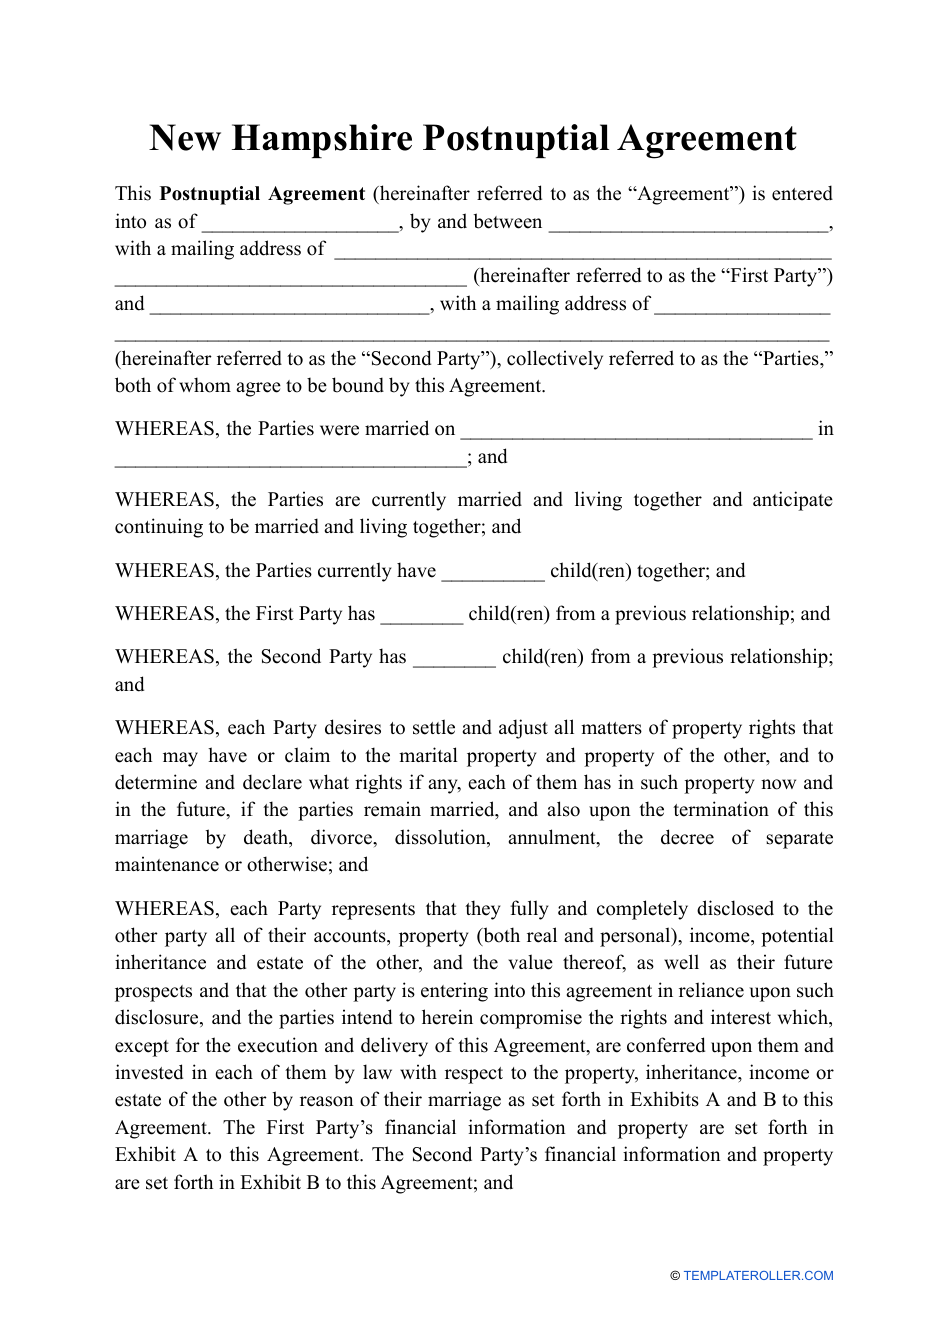 Postnuptial Agreement Template - New Hampshire, Page 1